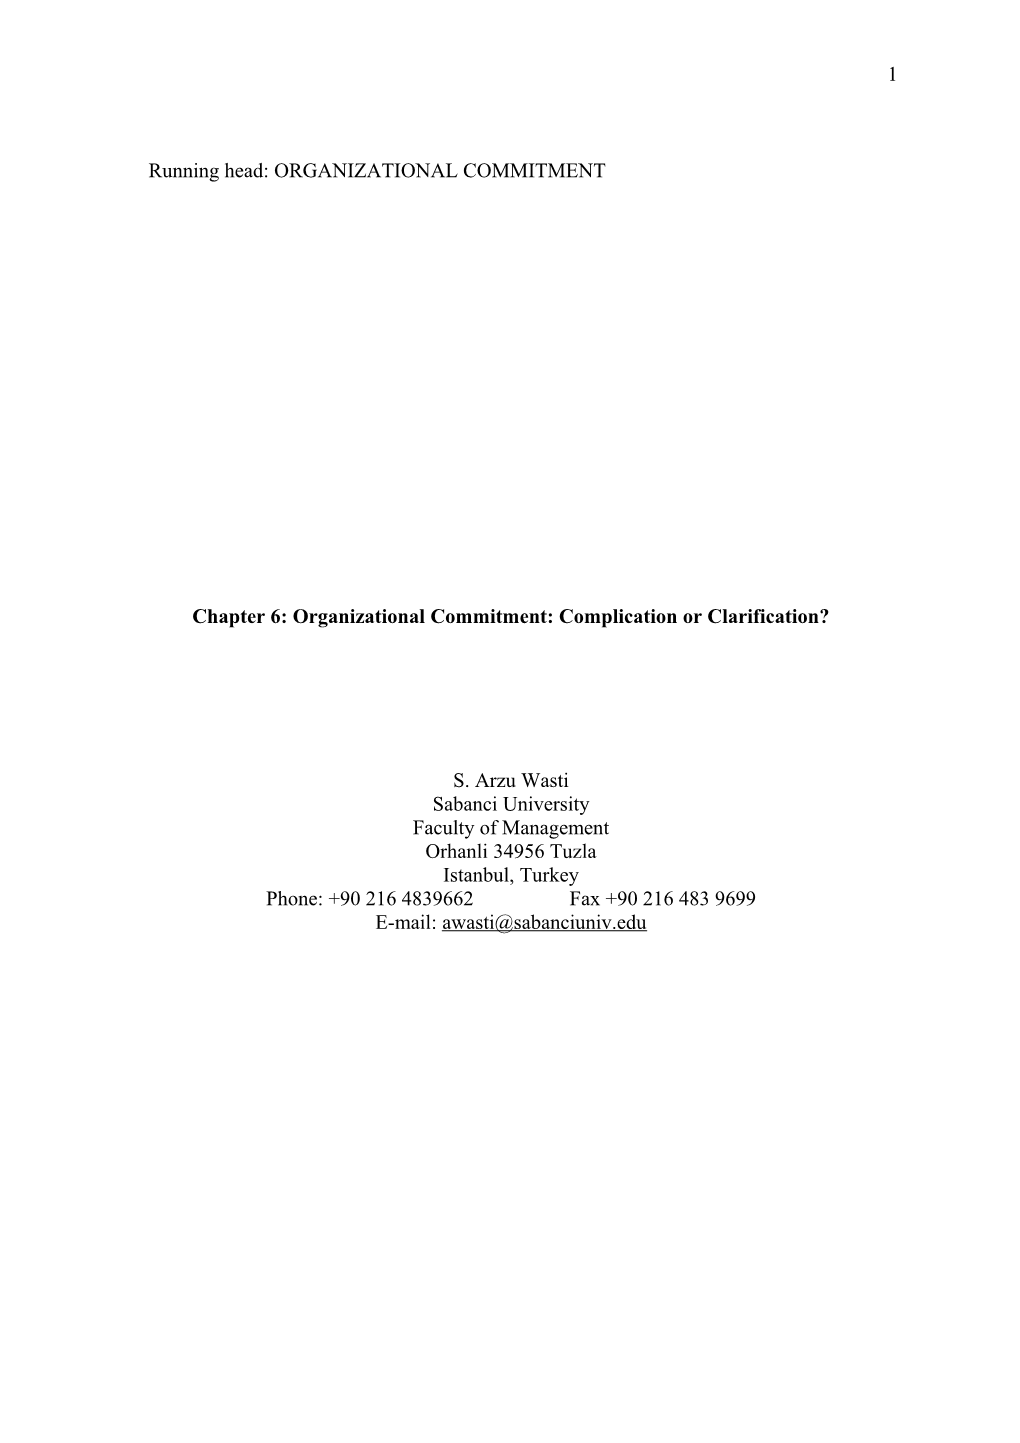 Chapter 6: Organizational Commitment: Complication Or Clarification?